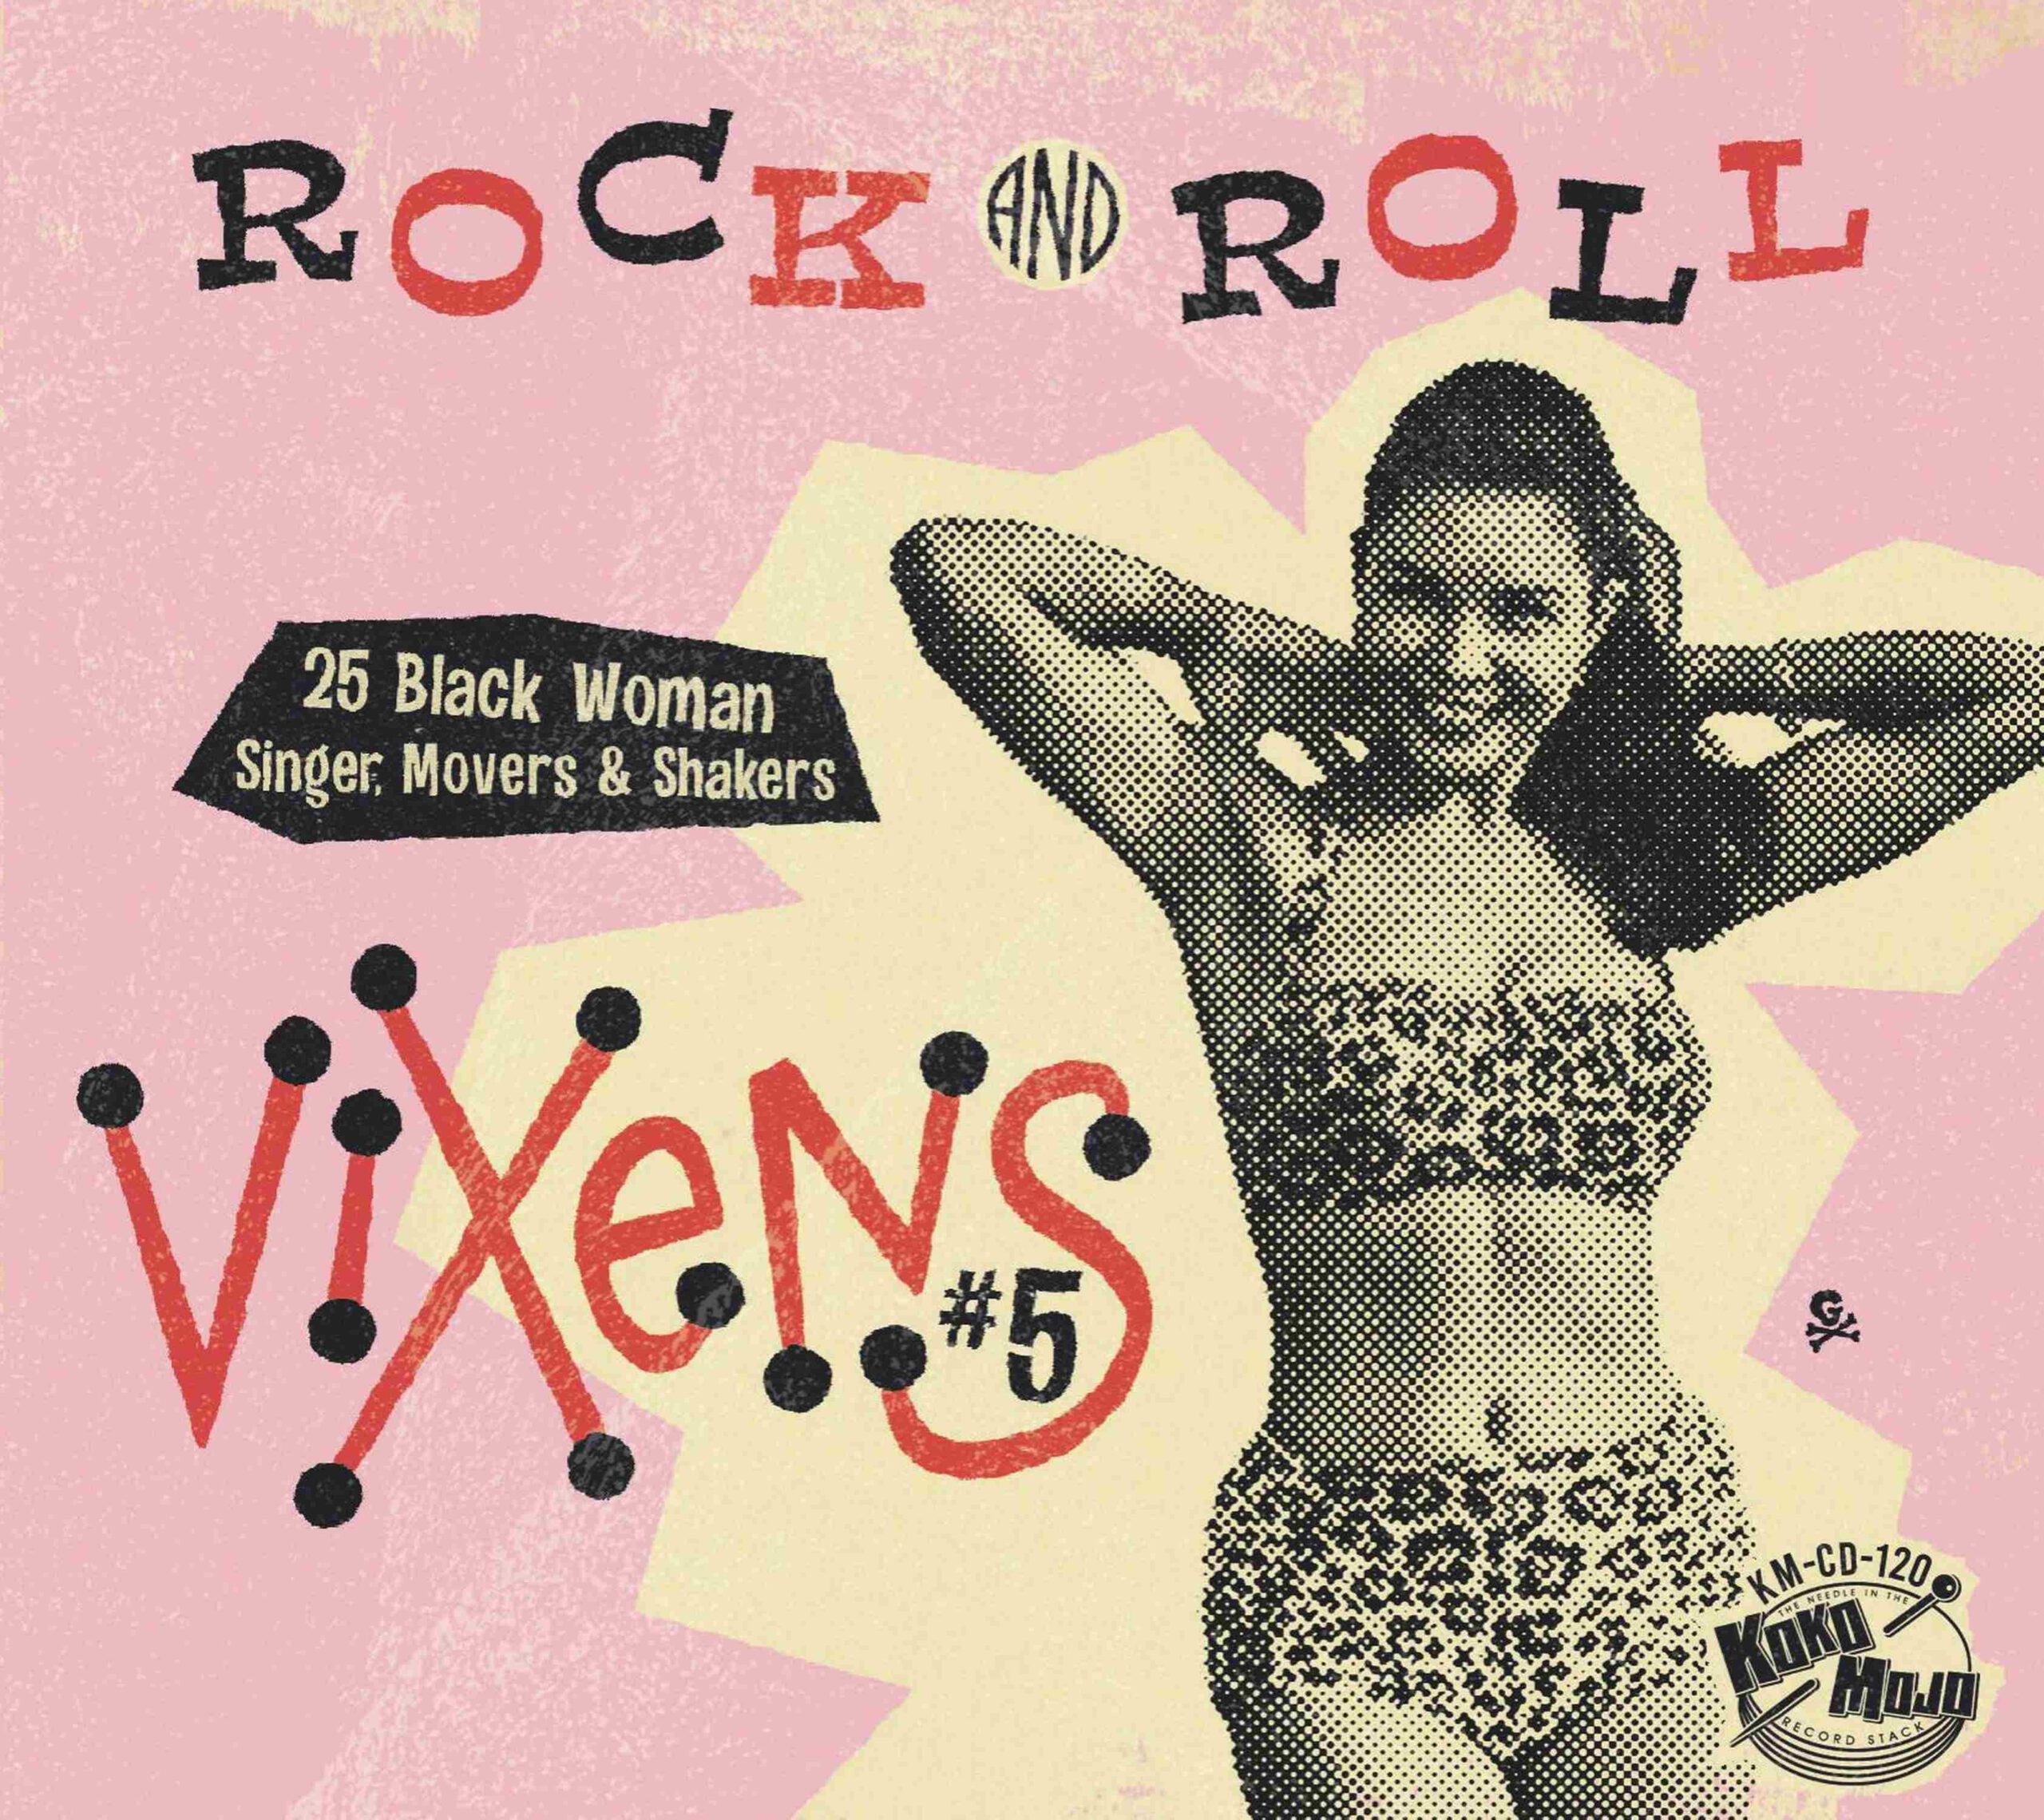 Various Artists - Rock & Roll Vixens 5 – 25 Black Woman Singer, Movers & Shakers